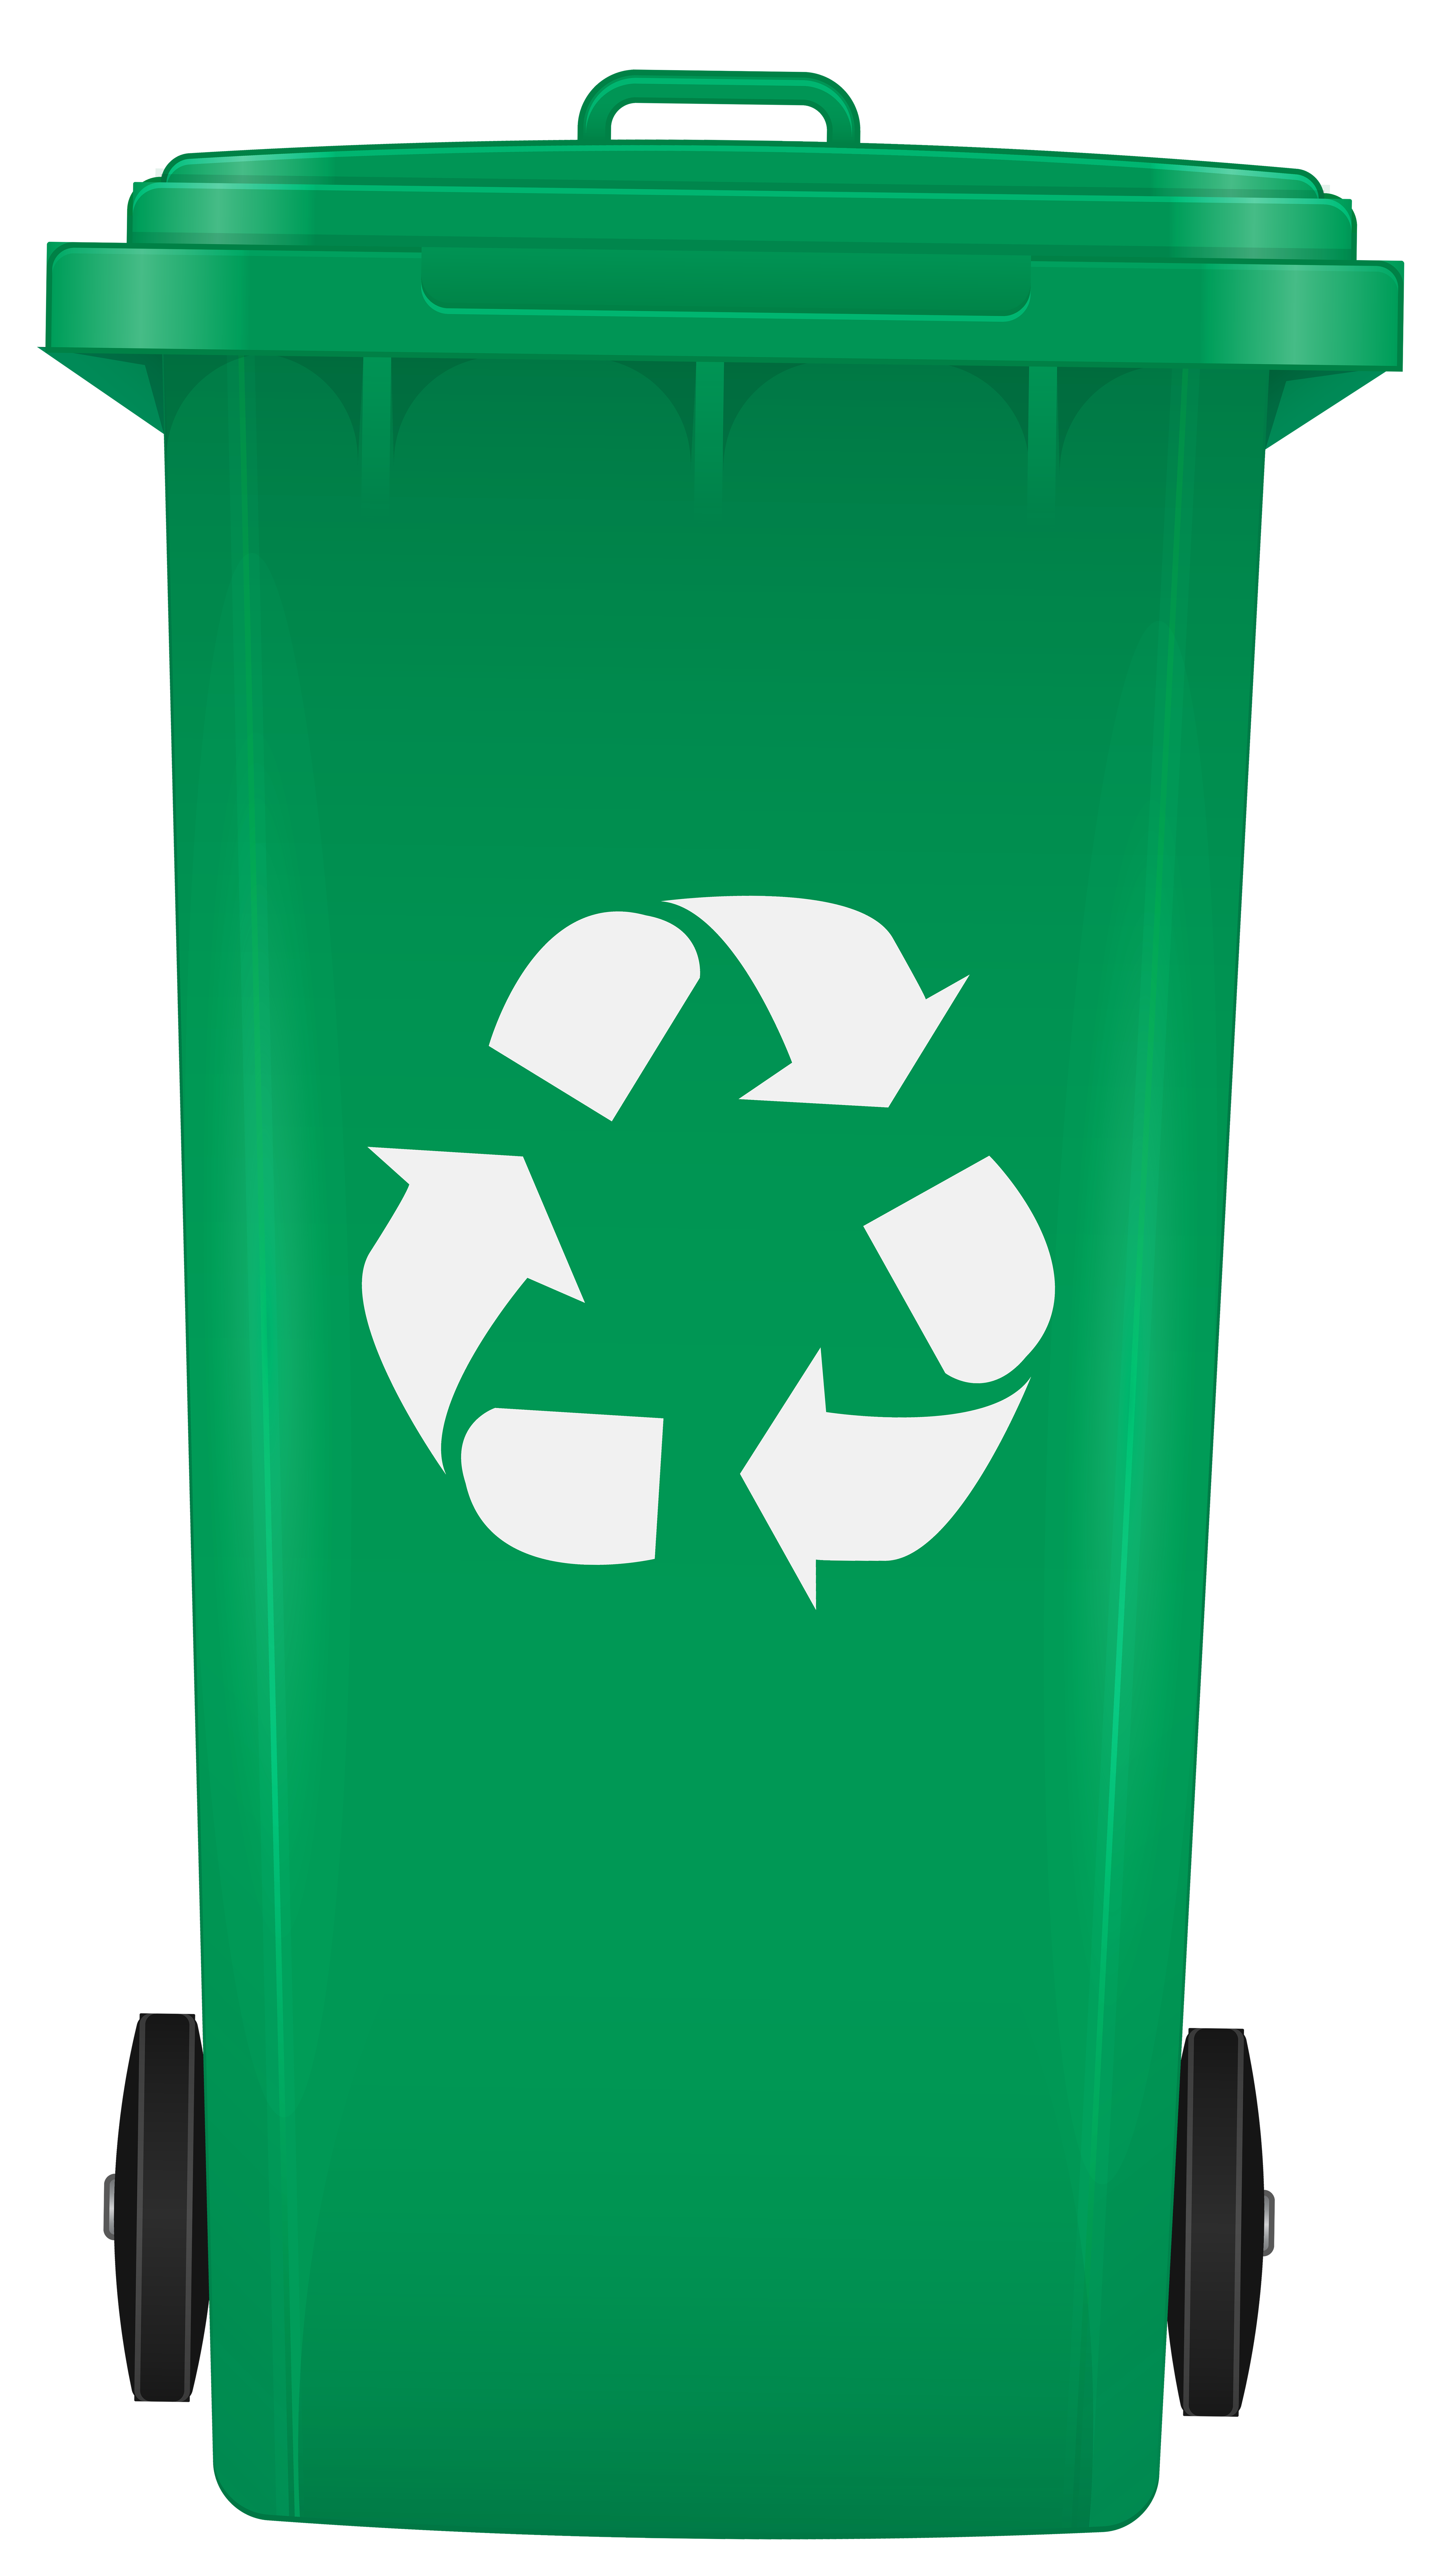 Free Recycle Bin Cliparts, Download Free Clip Art, Free ...